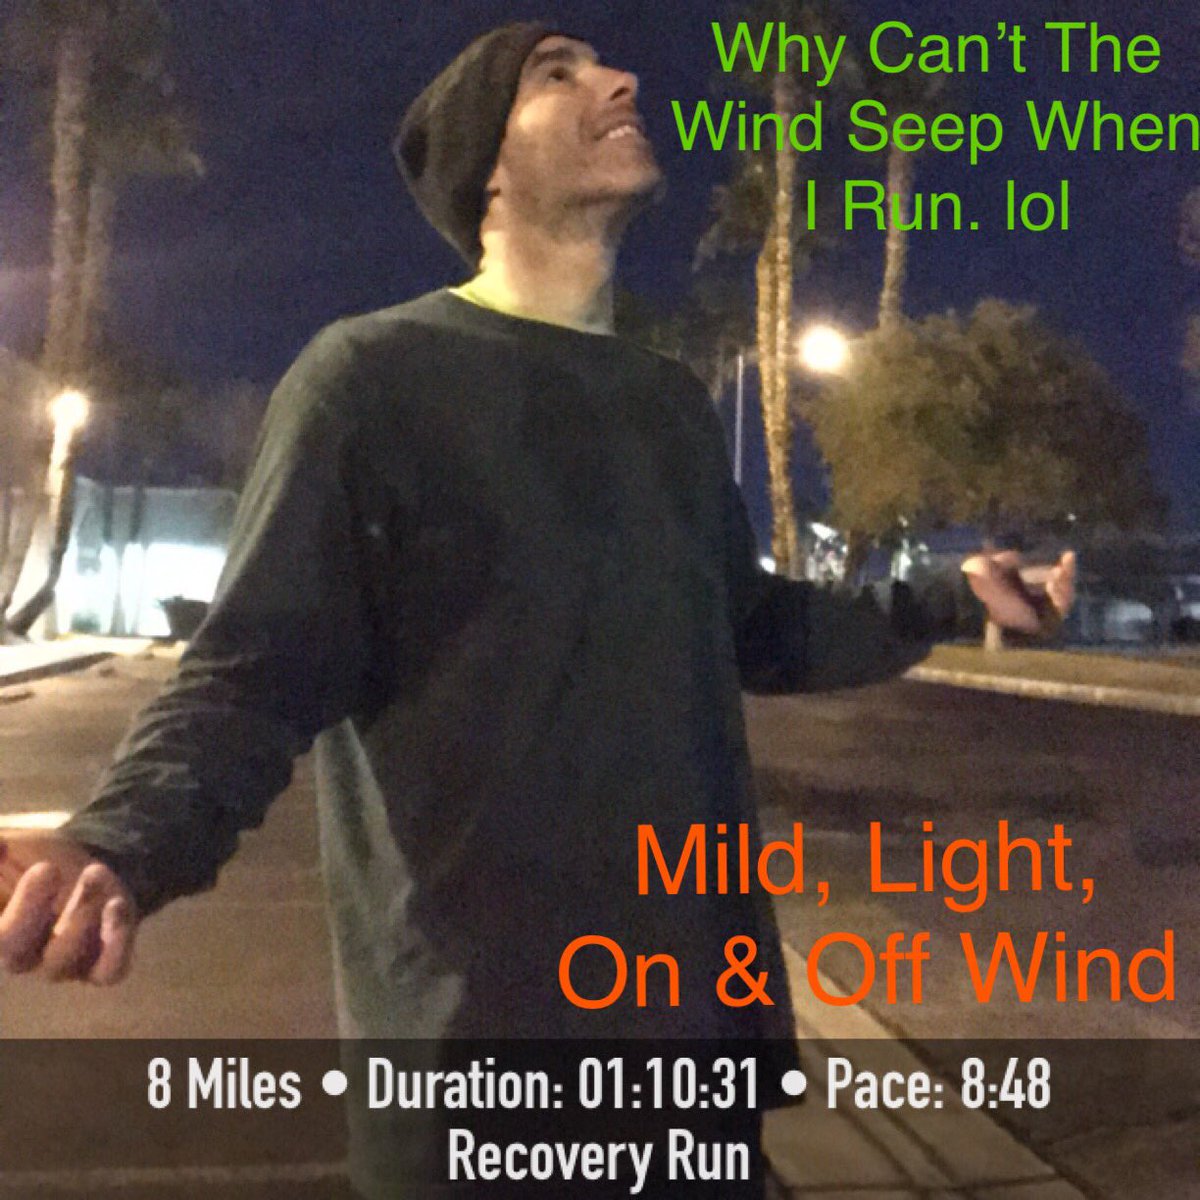 Wind is your friend they say. Fast days with wind are more annoying than days like today with a recovery Run. Still l, I do not like the Vegas windy weather.#wearetherunners #instagramrunnera #runlong #runselfierepeat #runnh #runforlife #runshots #runningmakesmehappy #runnershigh